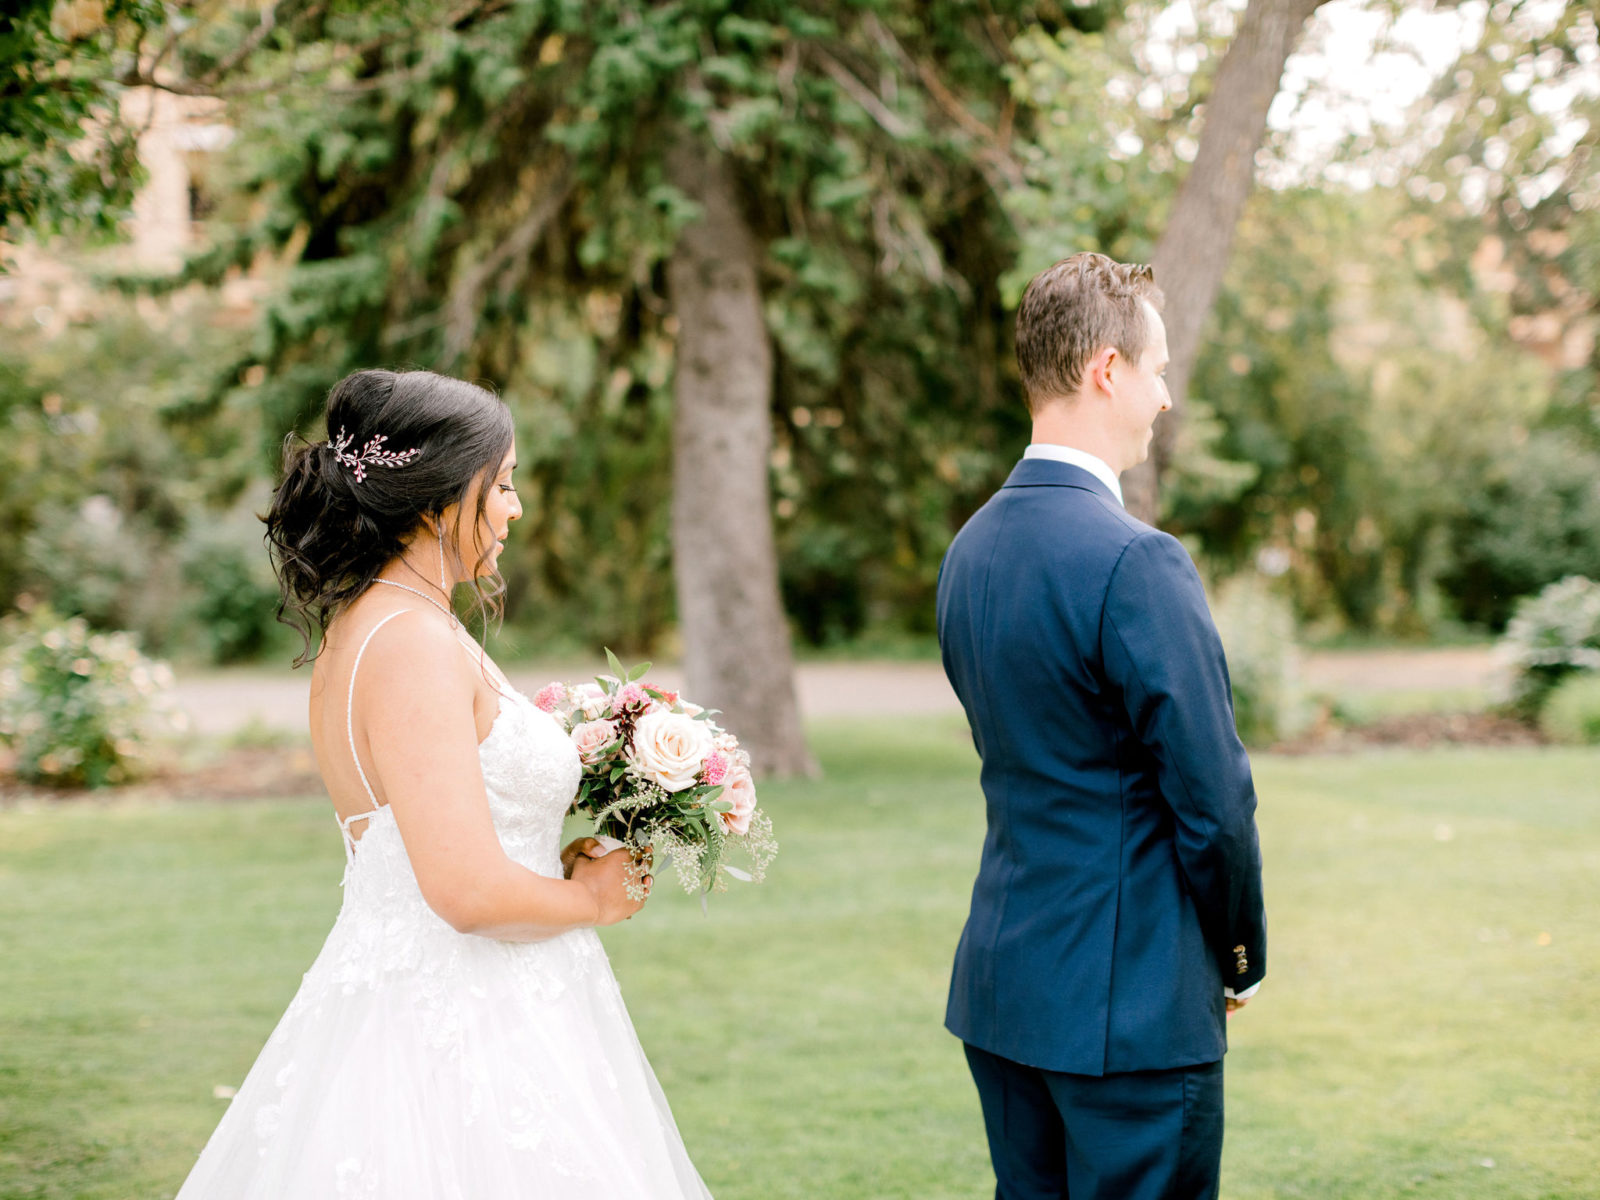 First look between bride and groom for a stunning summer wedding